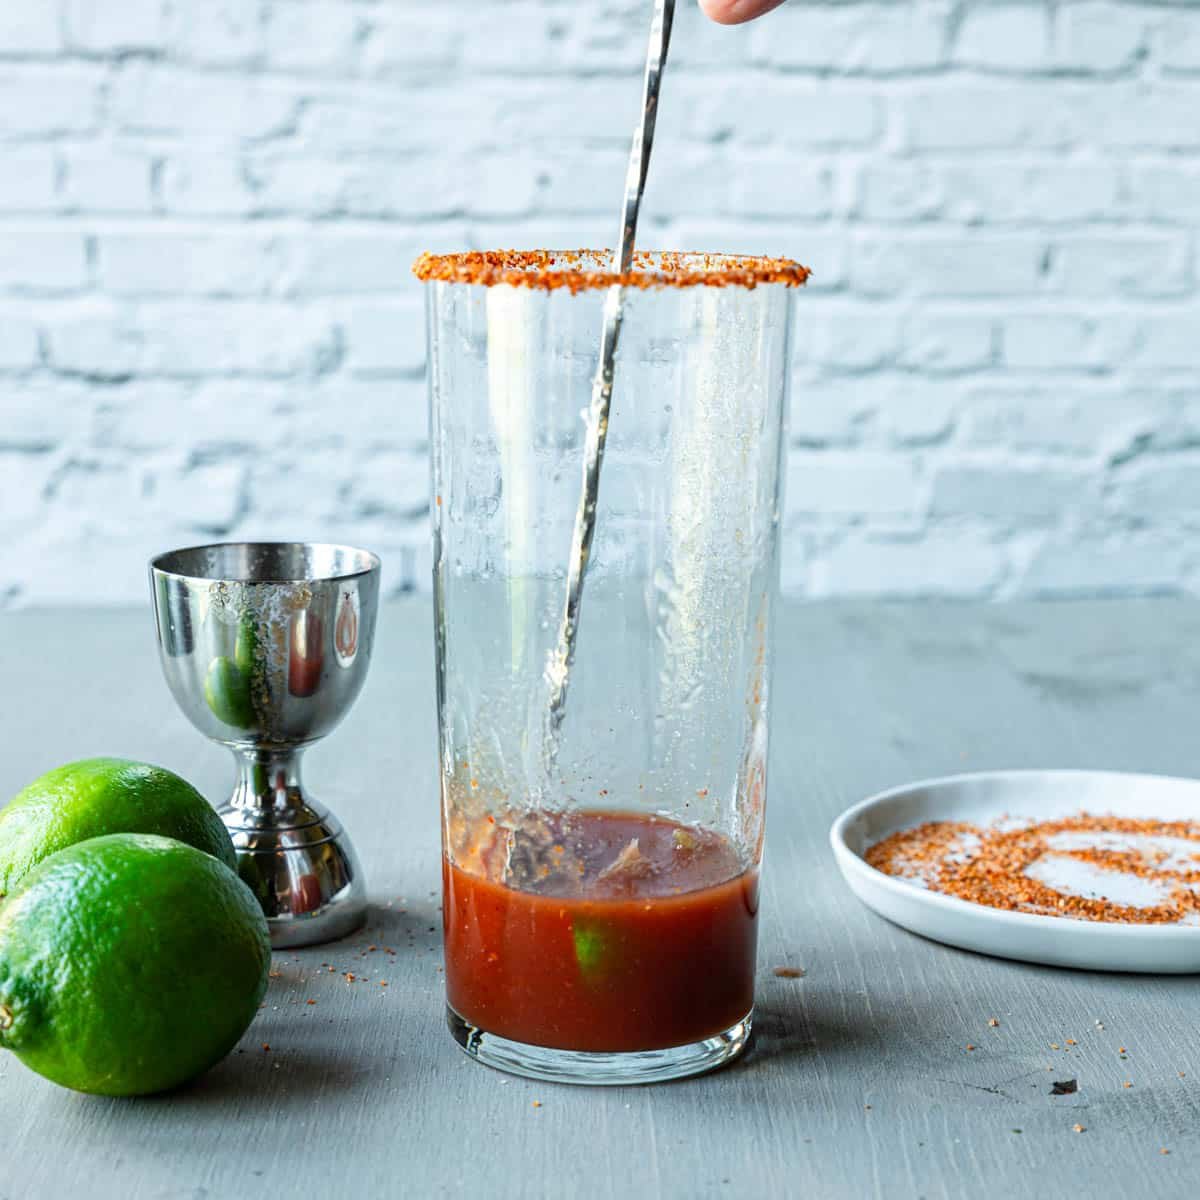 stirring the tomato and spices for a Michelada